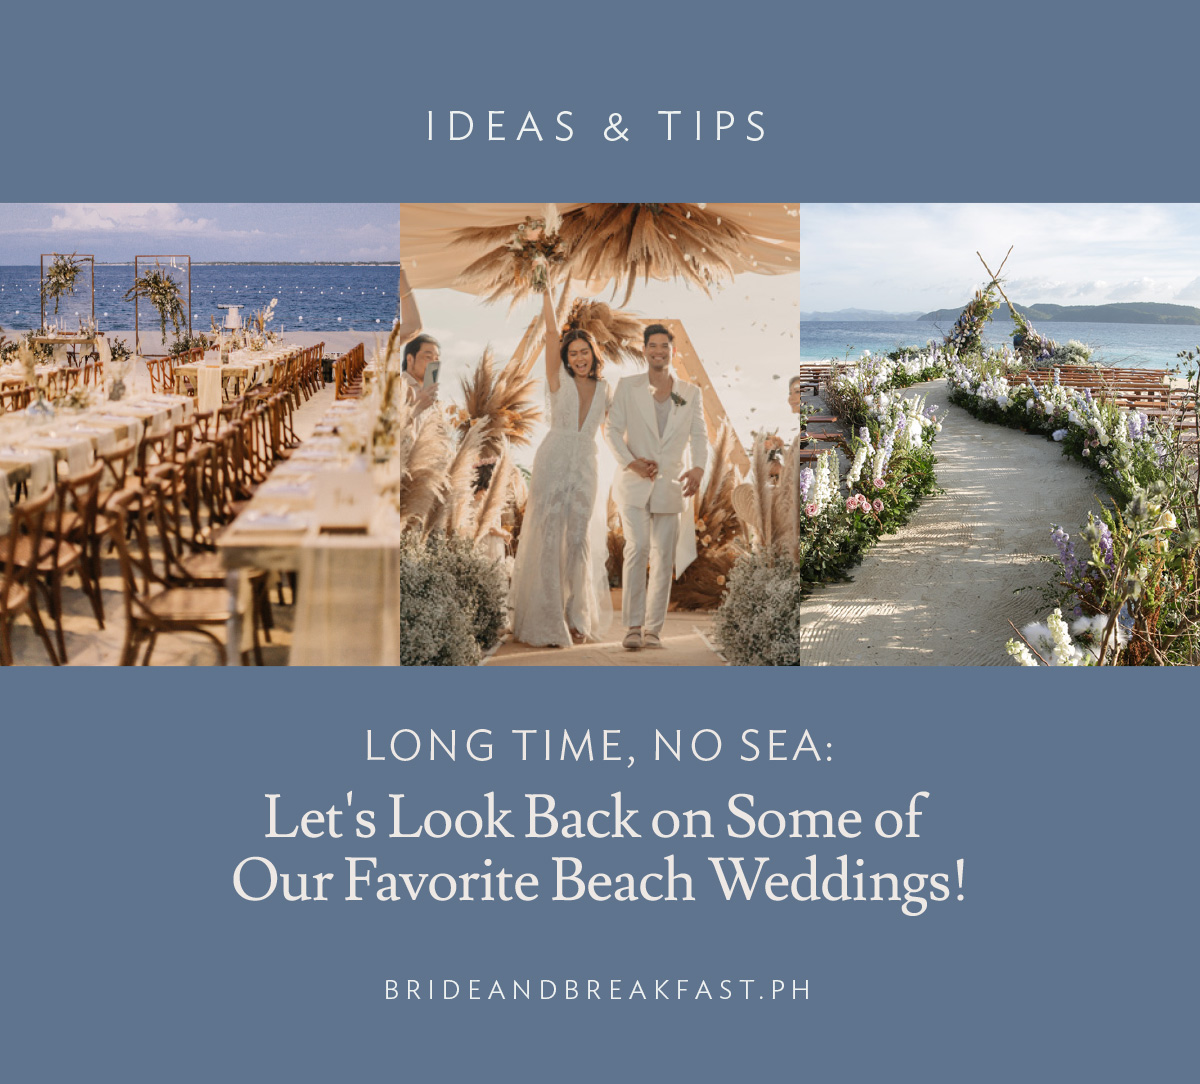 Long Time, No Sea: Let's Look Back on Some of Our Favorite Beach Weddings!